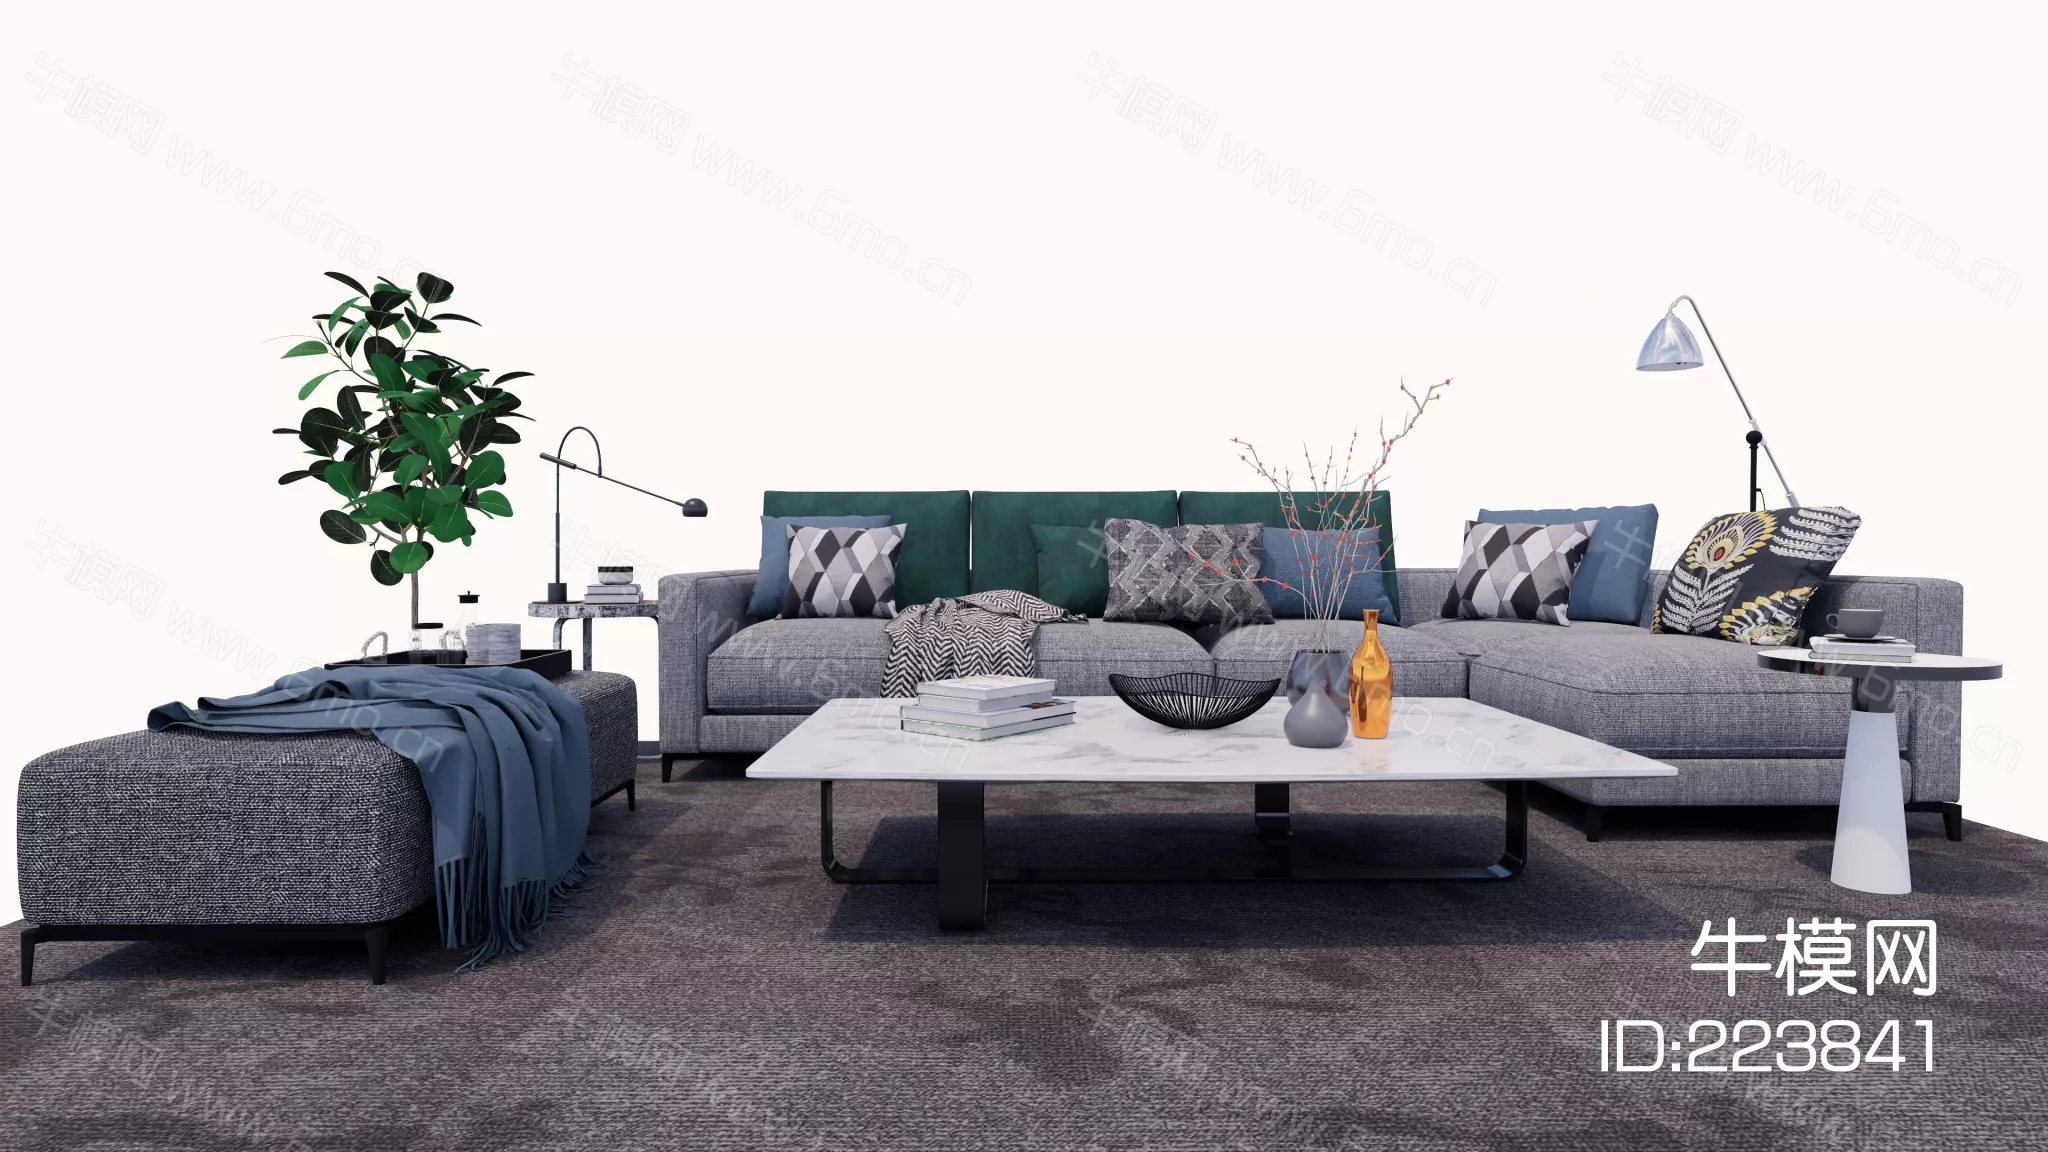 MODERN SOFA - SKETCHUP 3D MODEL - VRAY OR ENSCAPE - ID13177